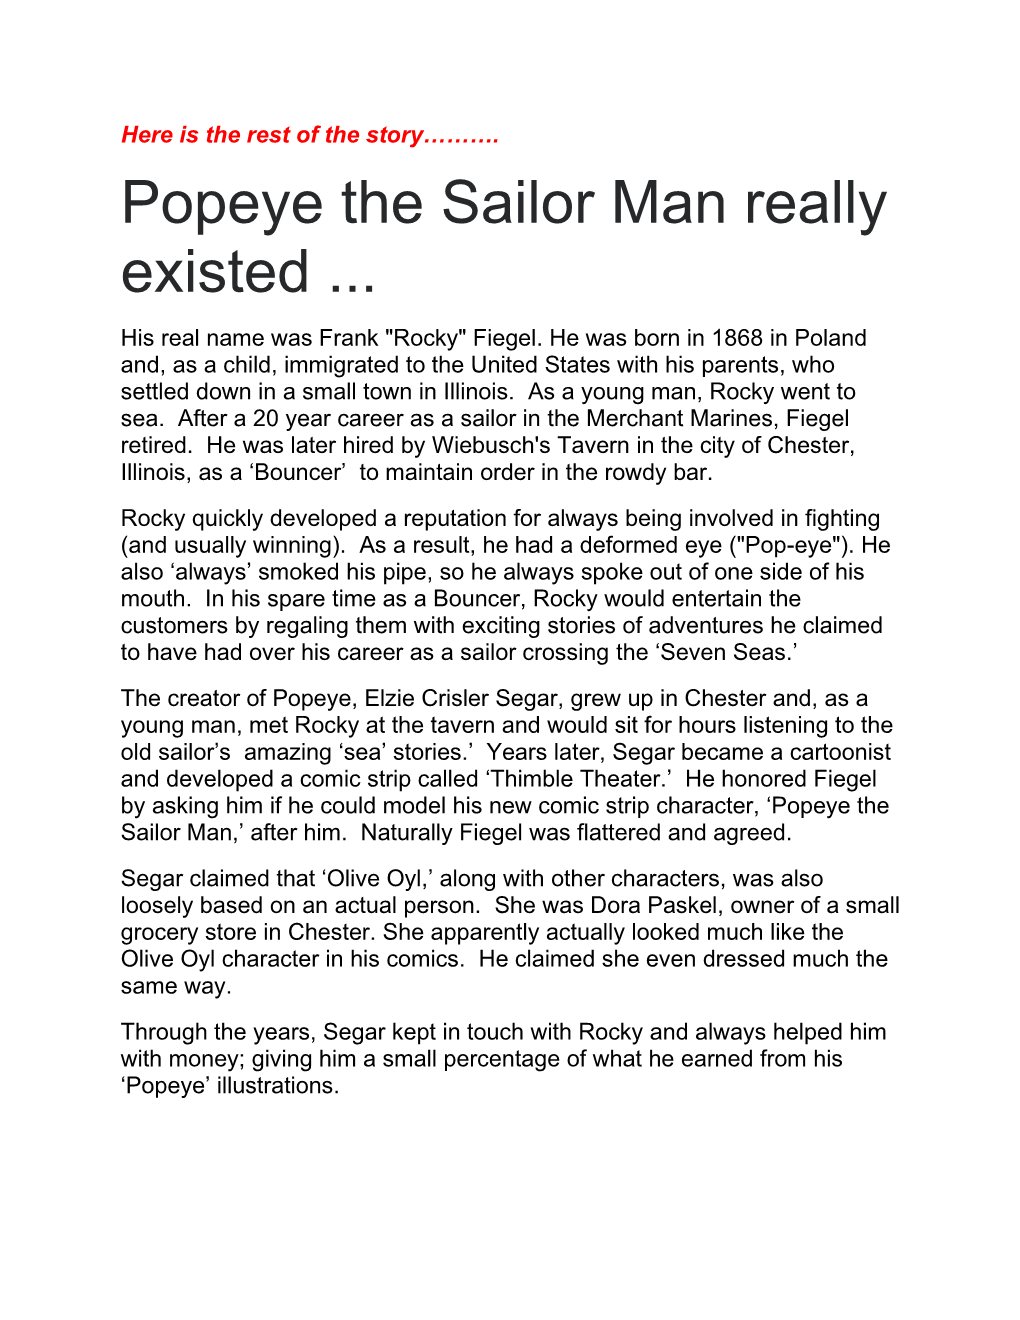 Popeye the Sailor Man Really Existed